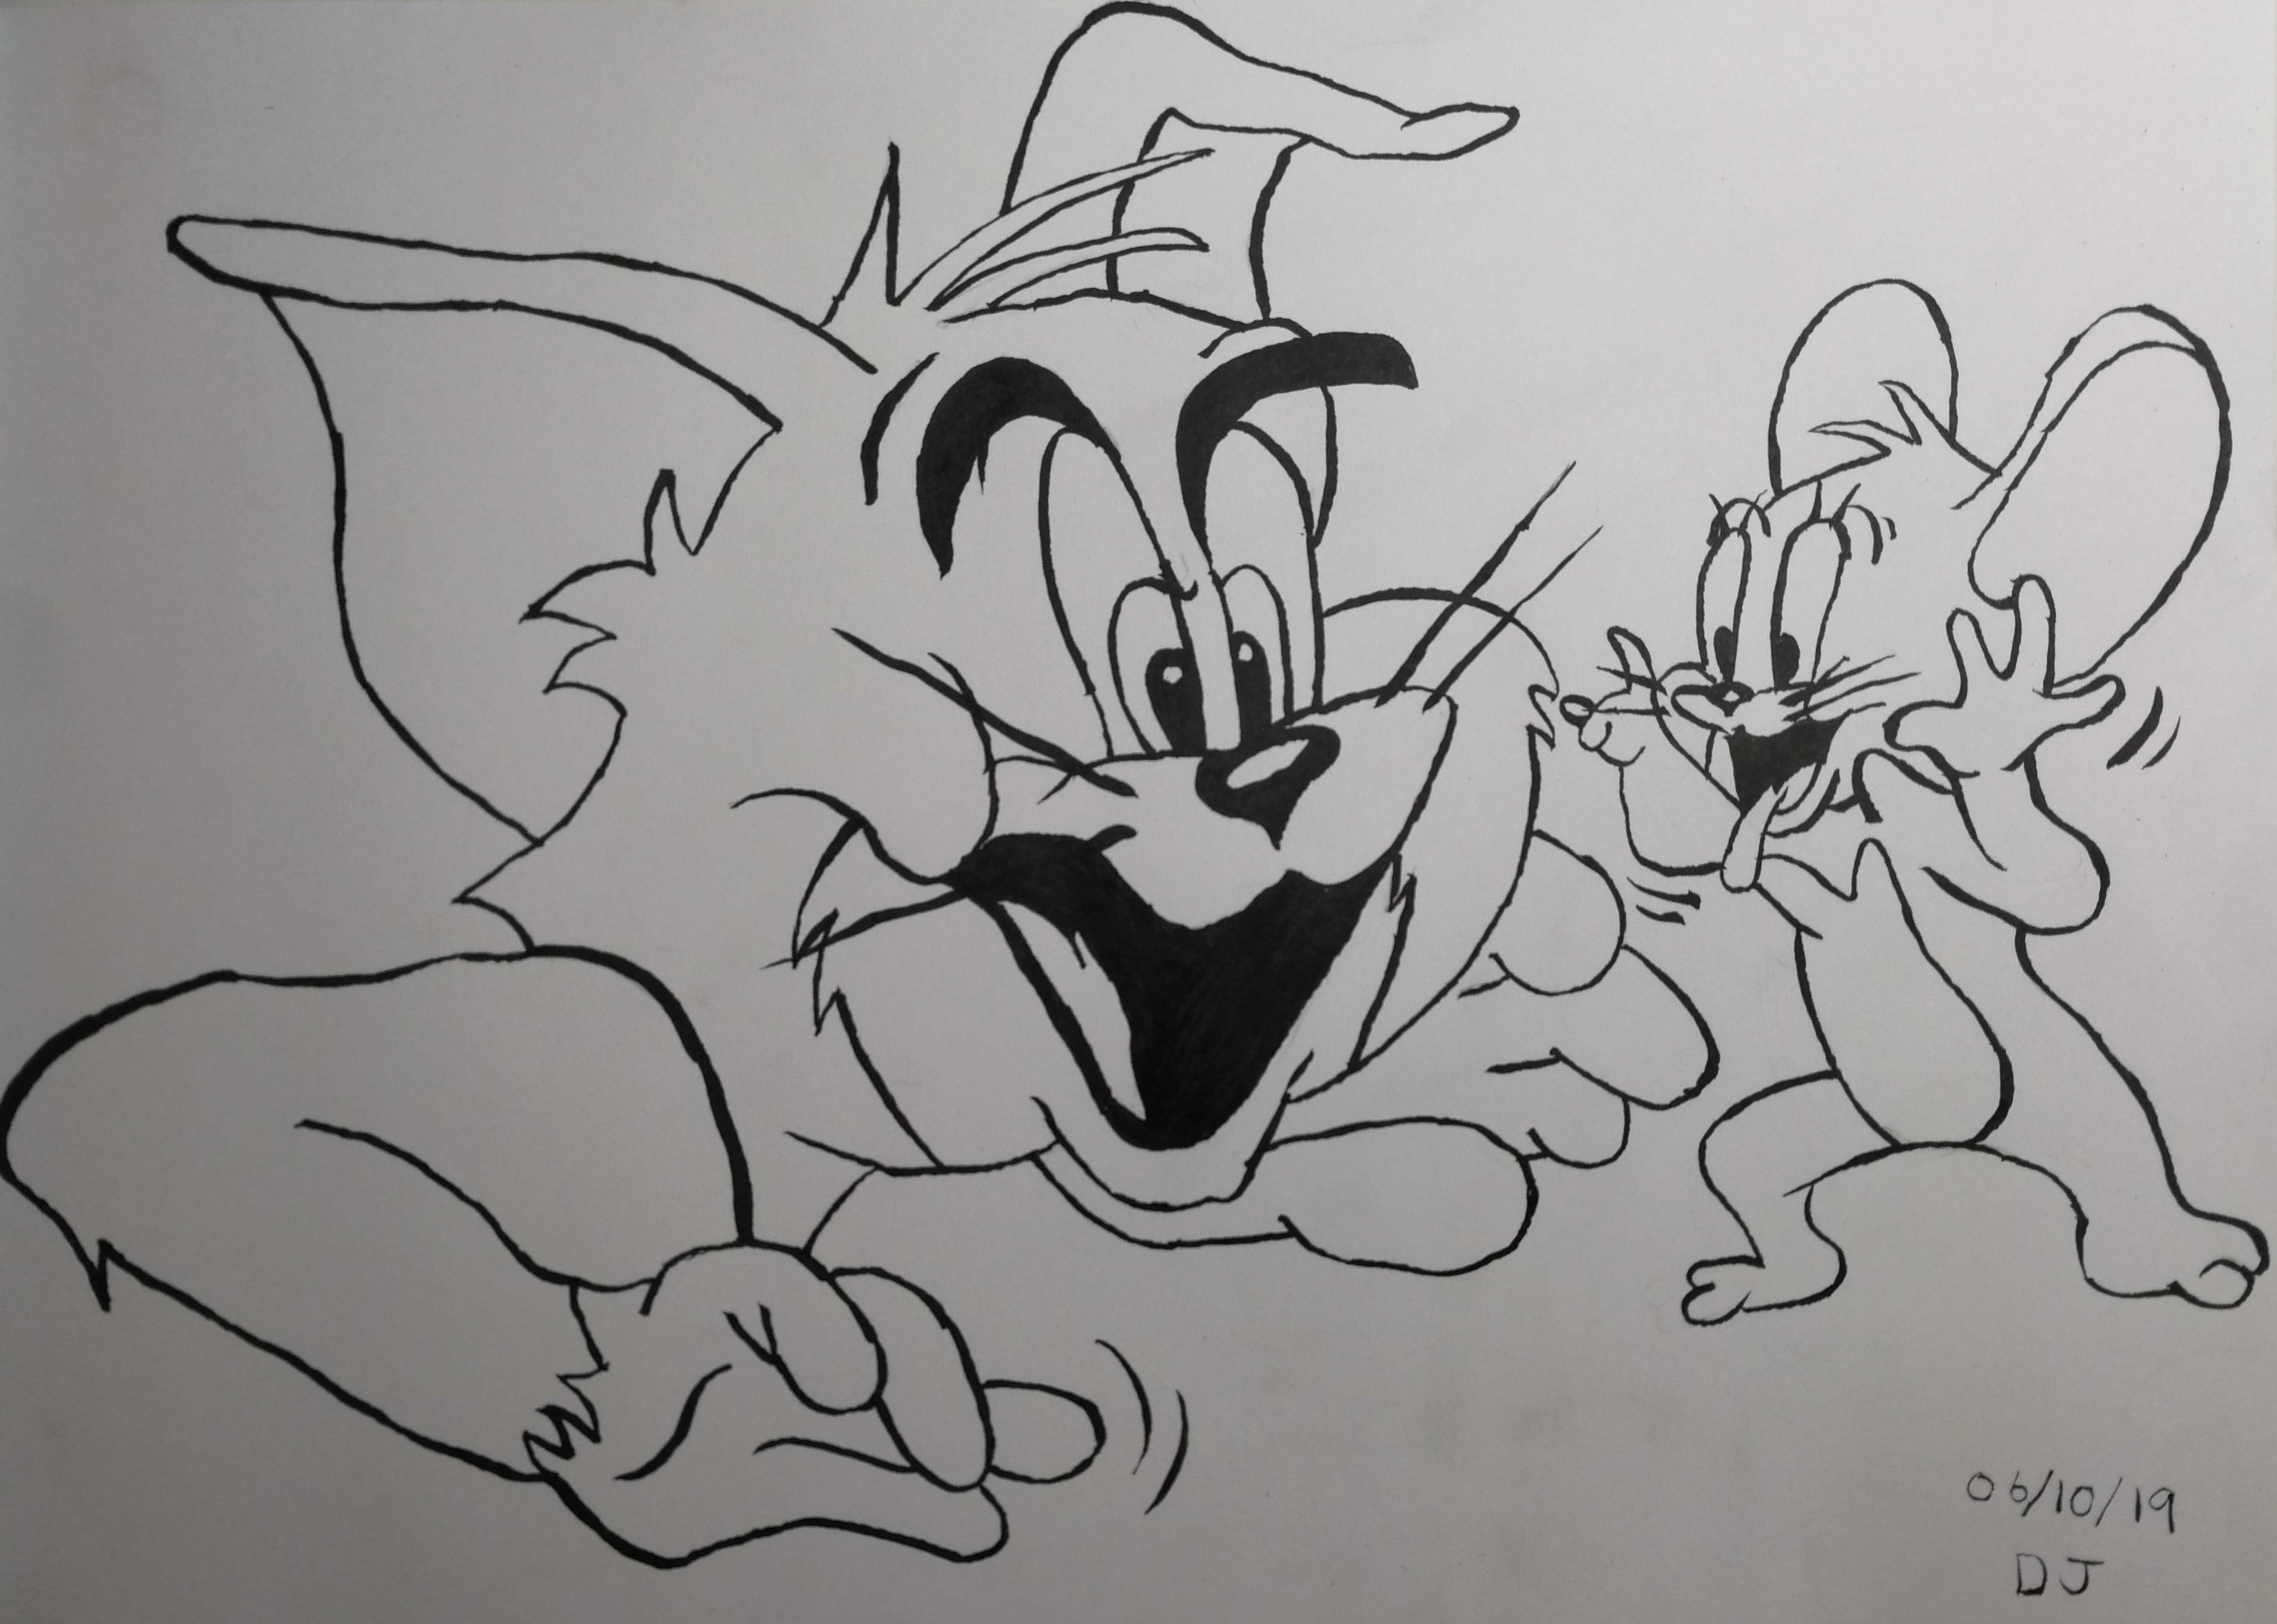 &ldquo;A drawing of Tom and Jerry for day 6 of Inktober 2019&rdquo;